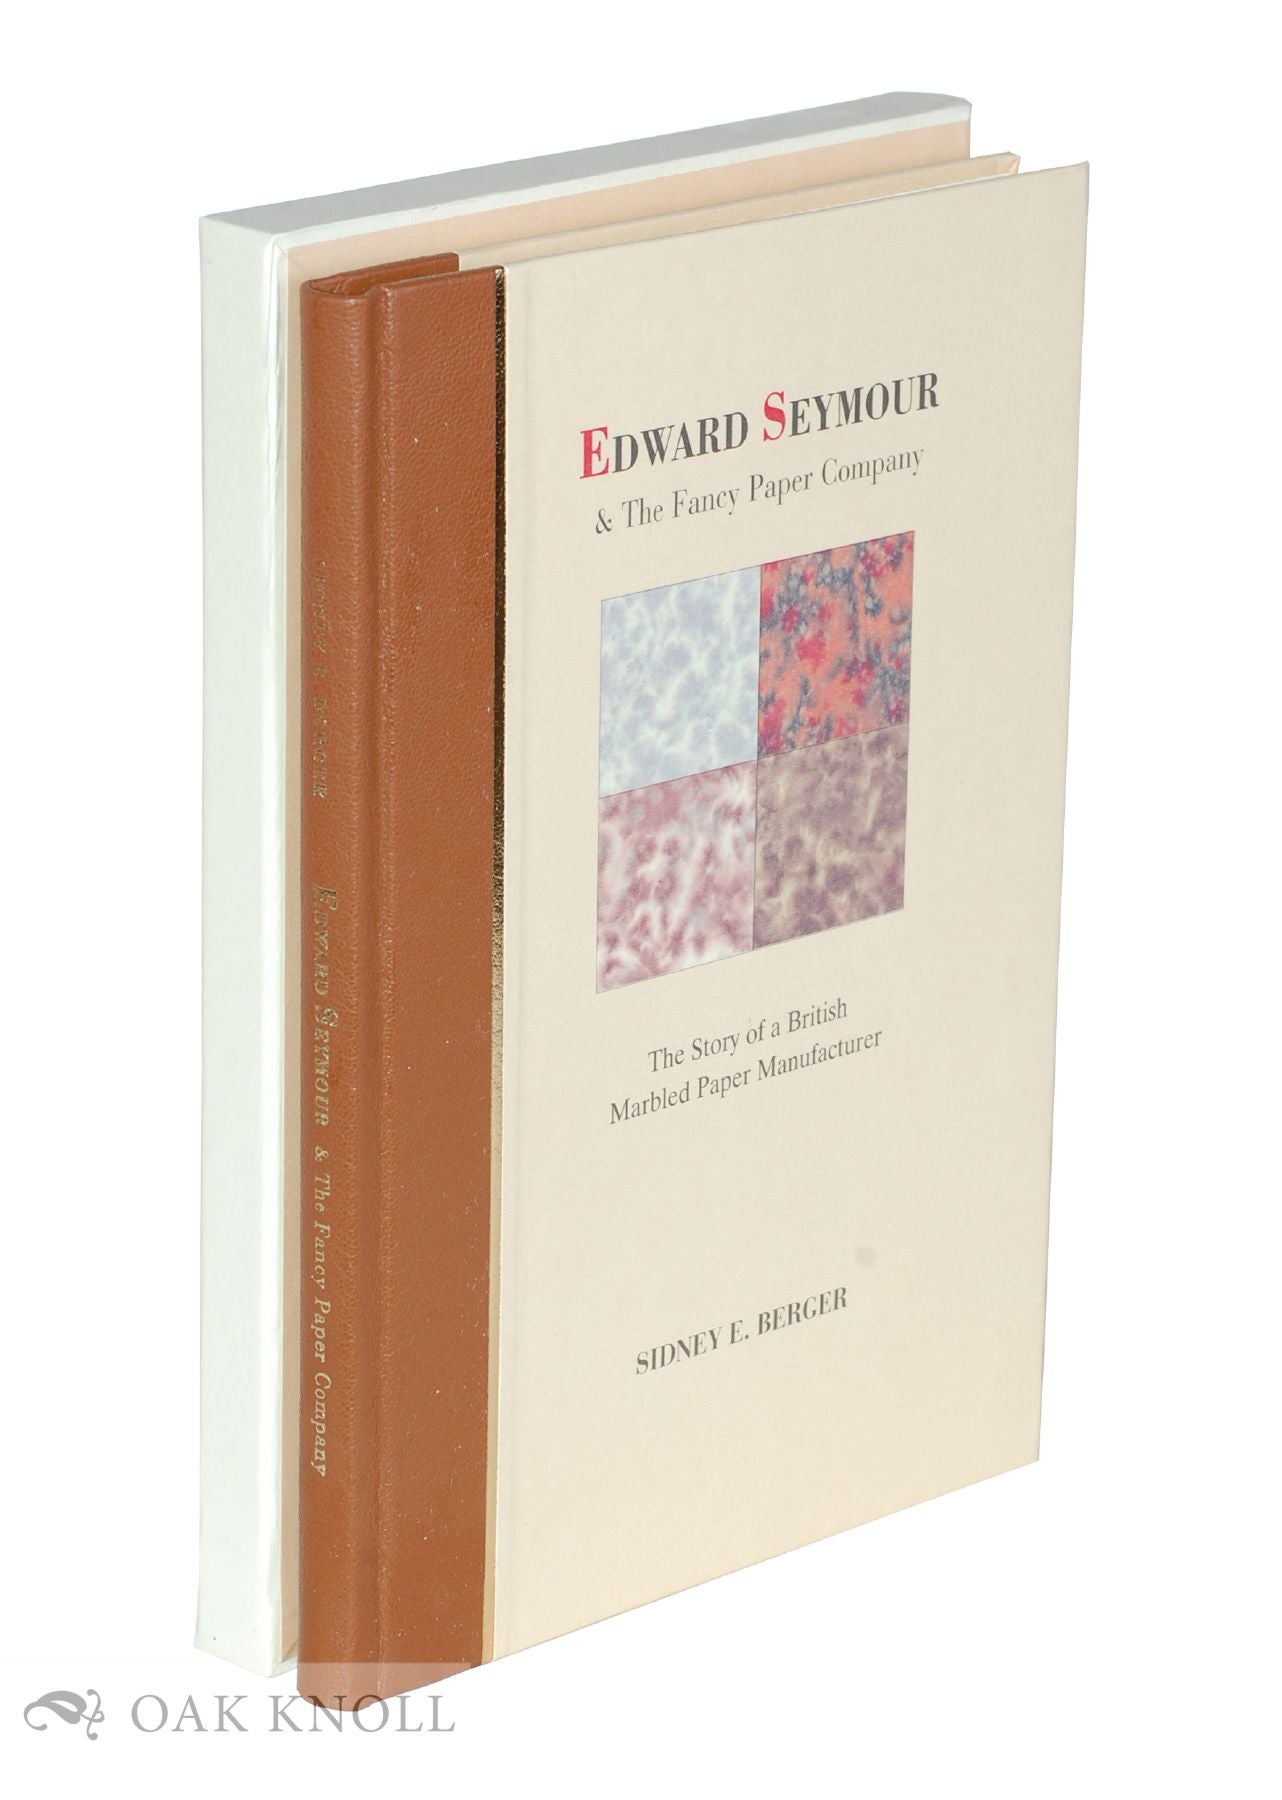 Table of Contents | EDWARD SEYMOUR AND THE FANCY PAPER COMPANY: THE STORY  OF A BRITISH MARBLED PAPER MANUFACTURER by Sidney E. Berger on Oak Knoll